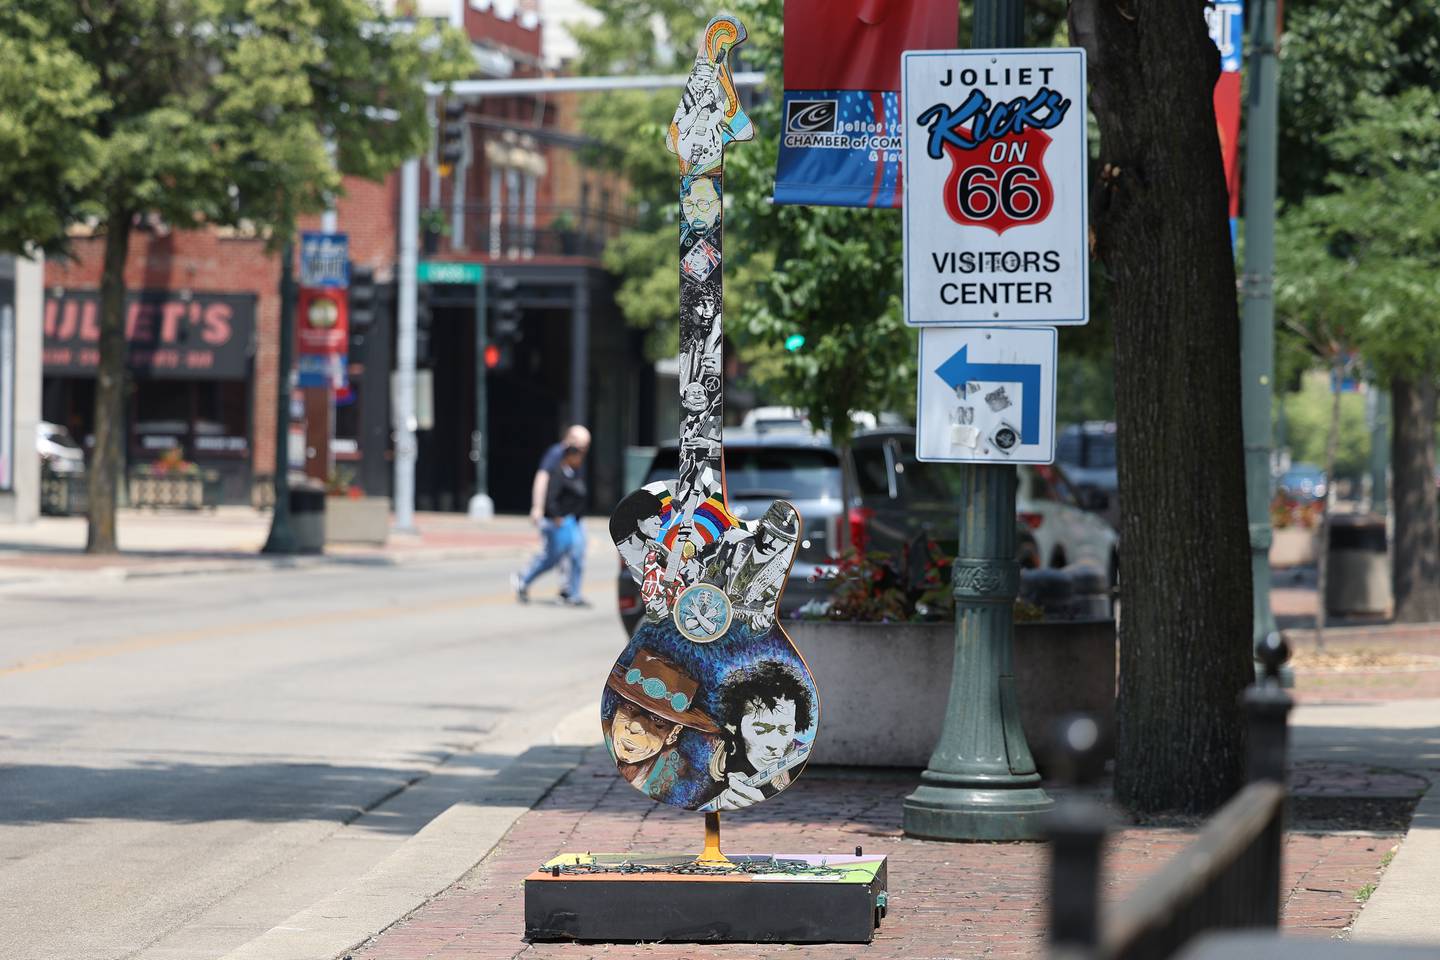 Commissioned guitar art sits along Chicago Street on Thursday, June 8, 2023, in Joliet.